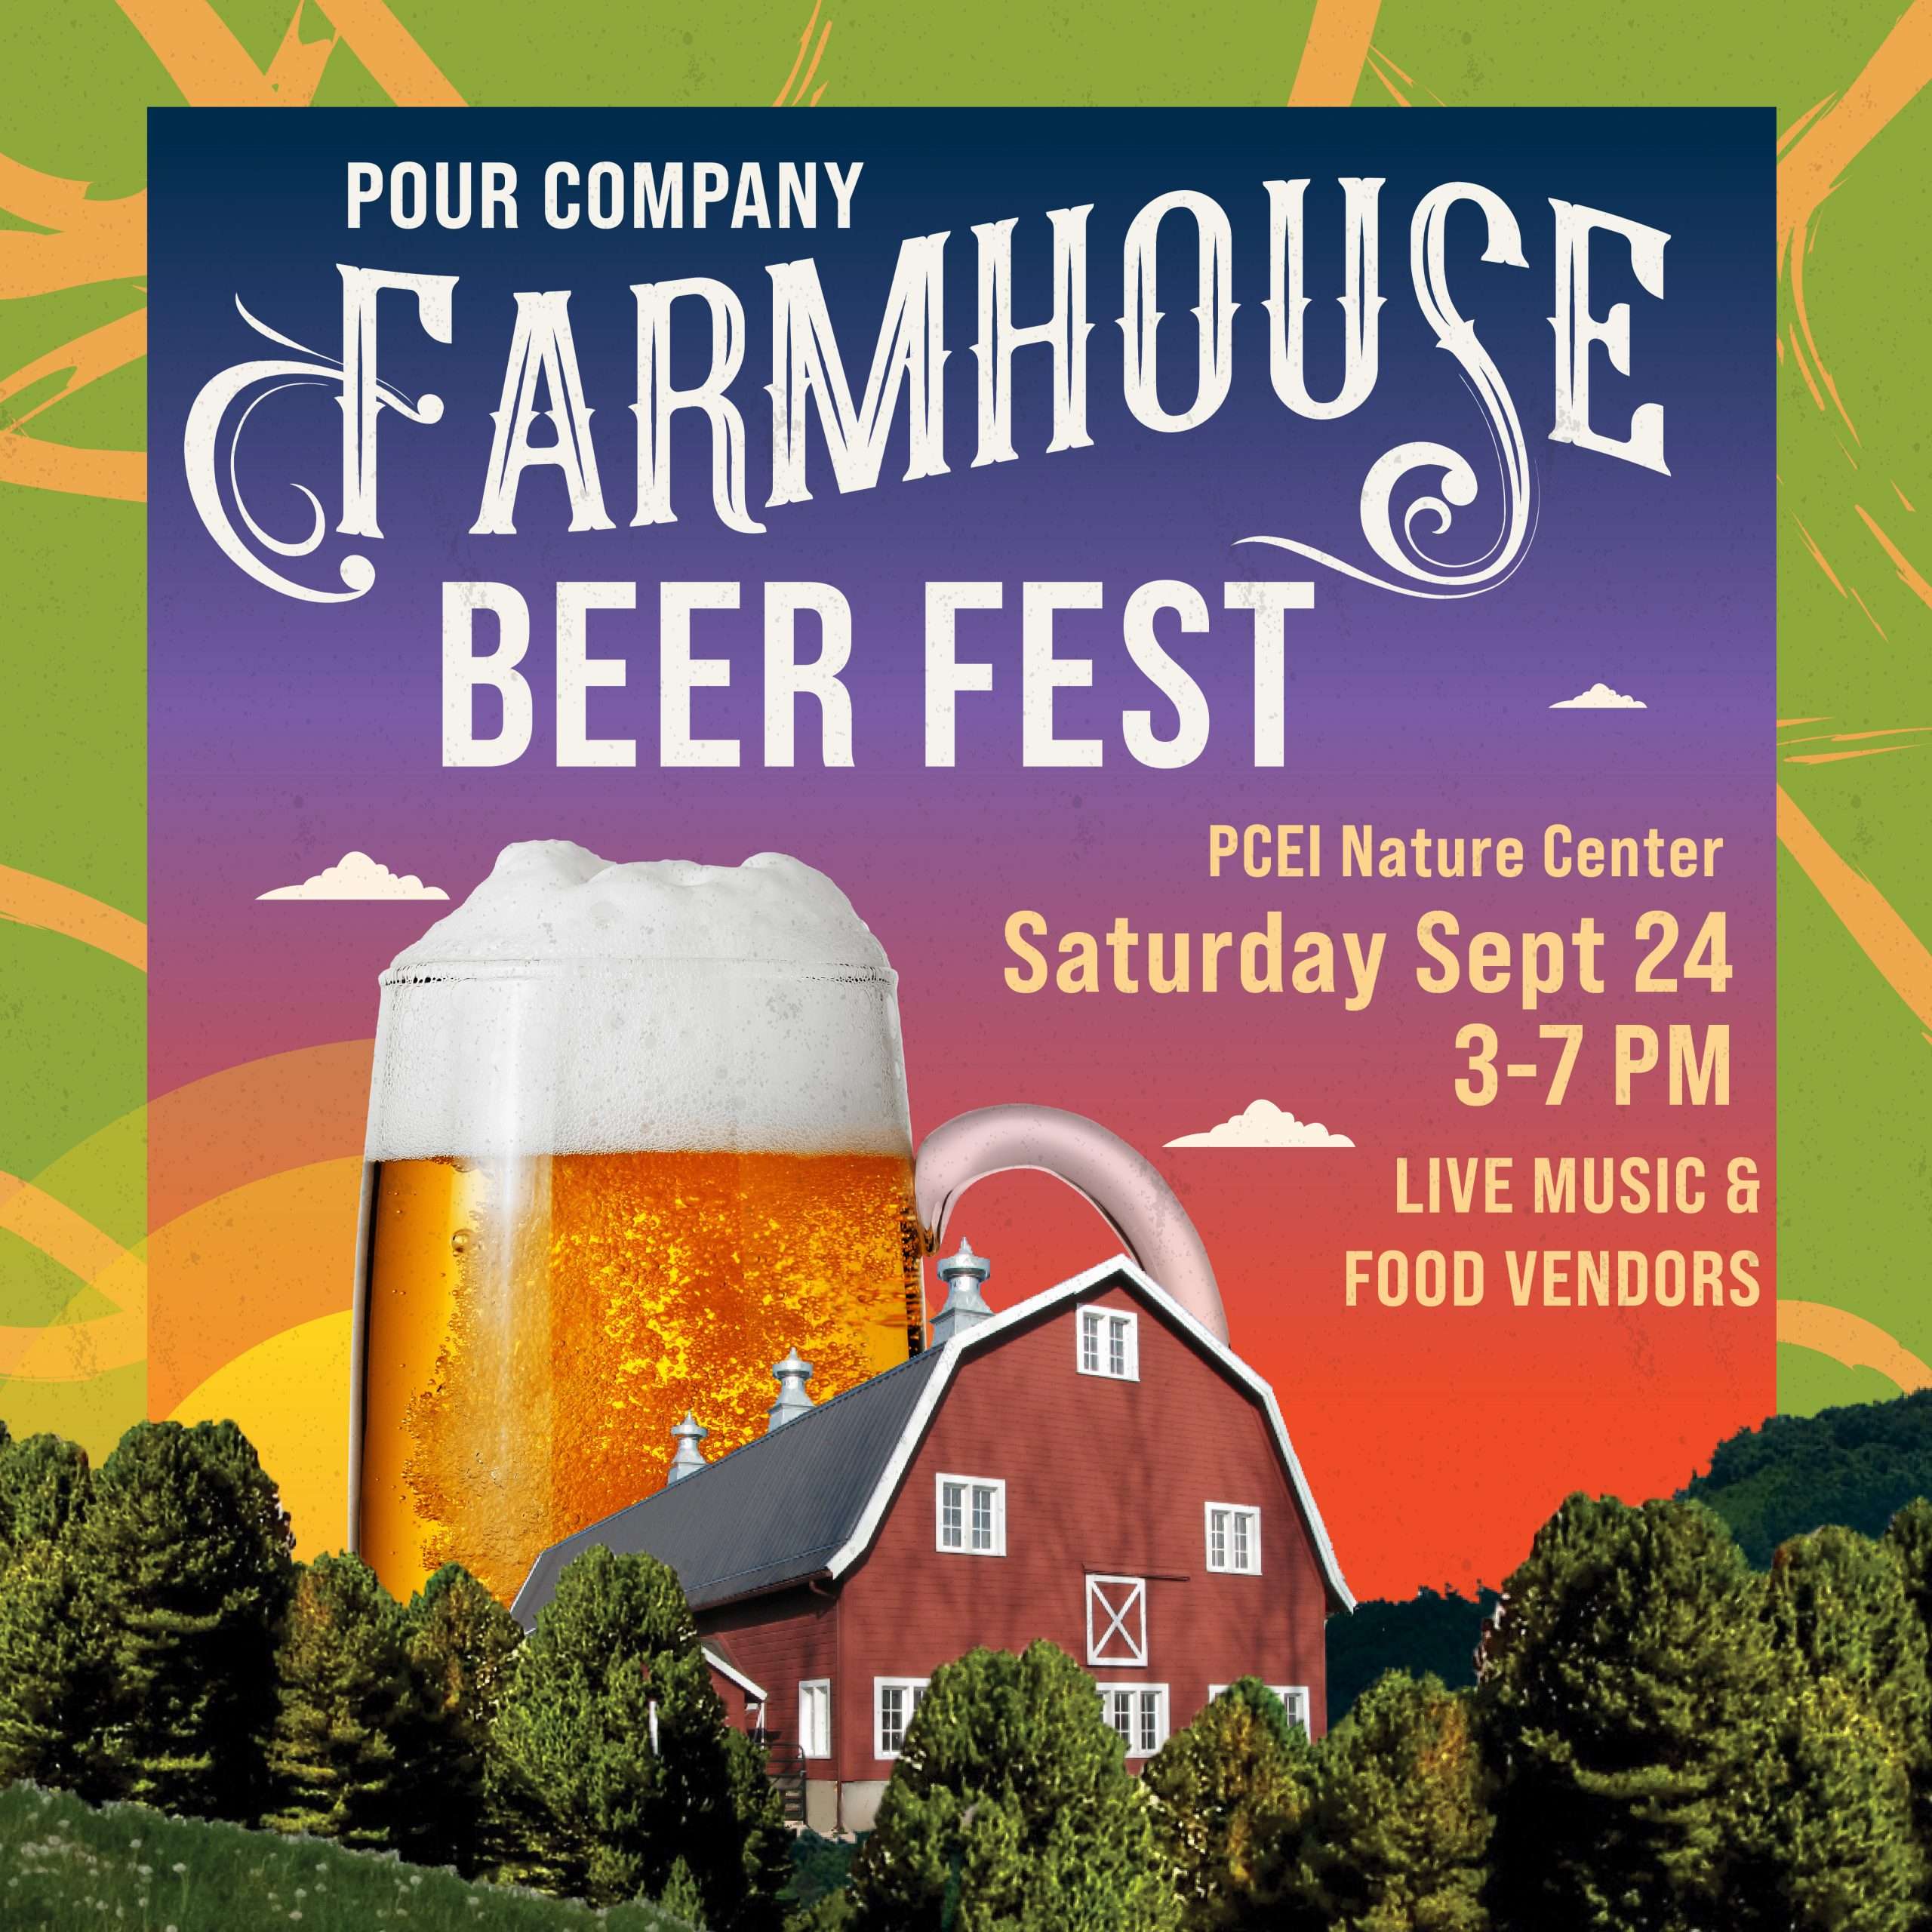 Pour Company Farmhouse Beer Fest  Moscow Idaho Chamber of Commerce